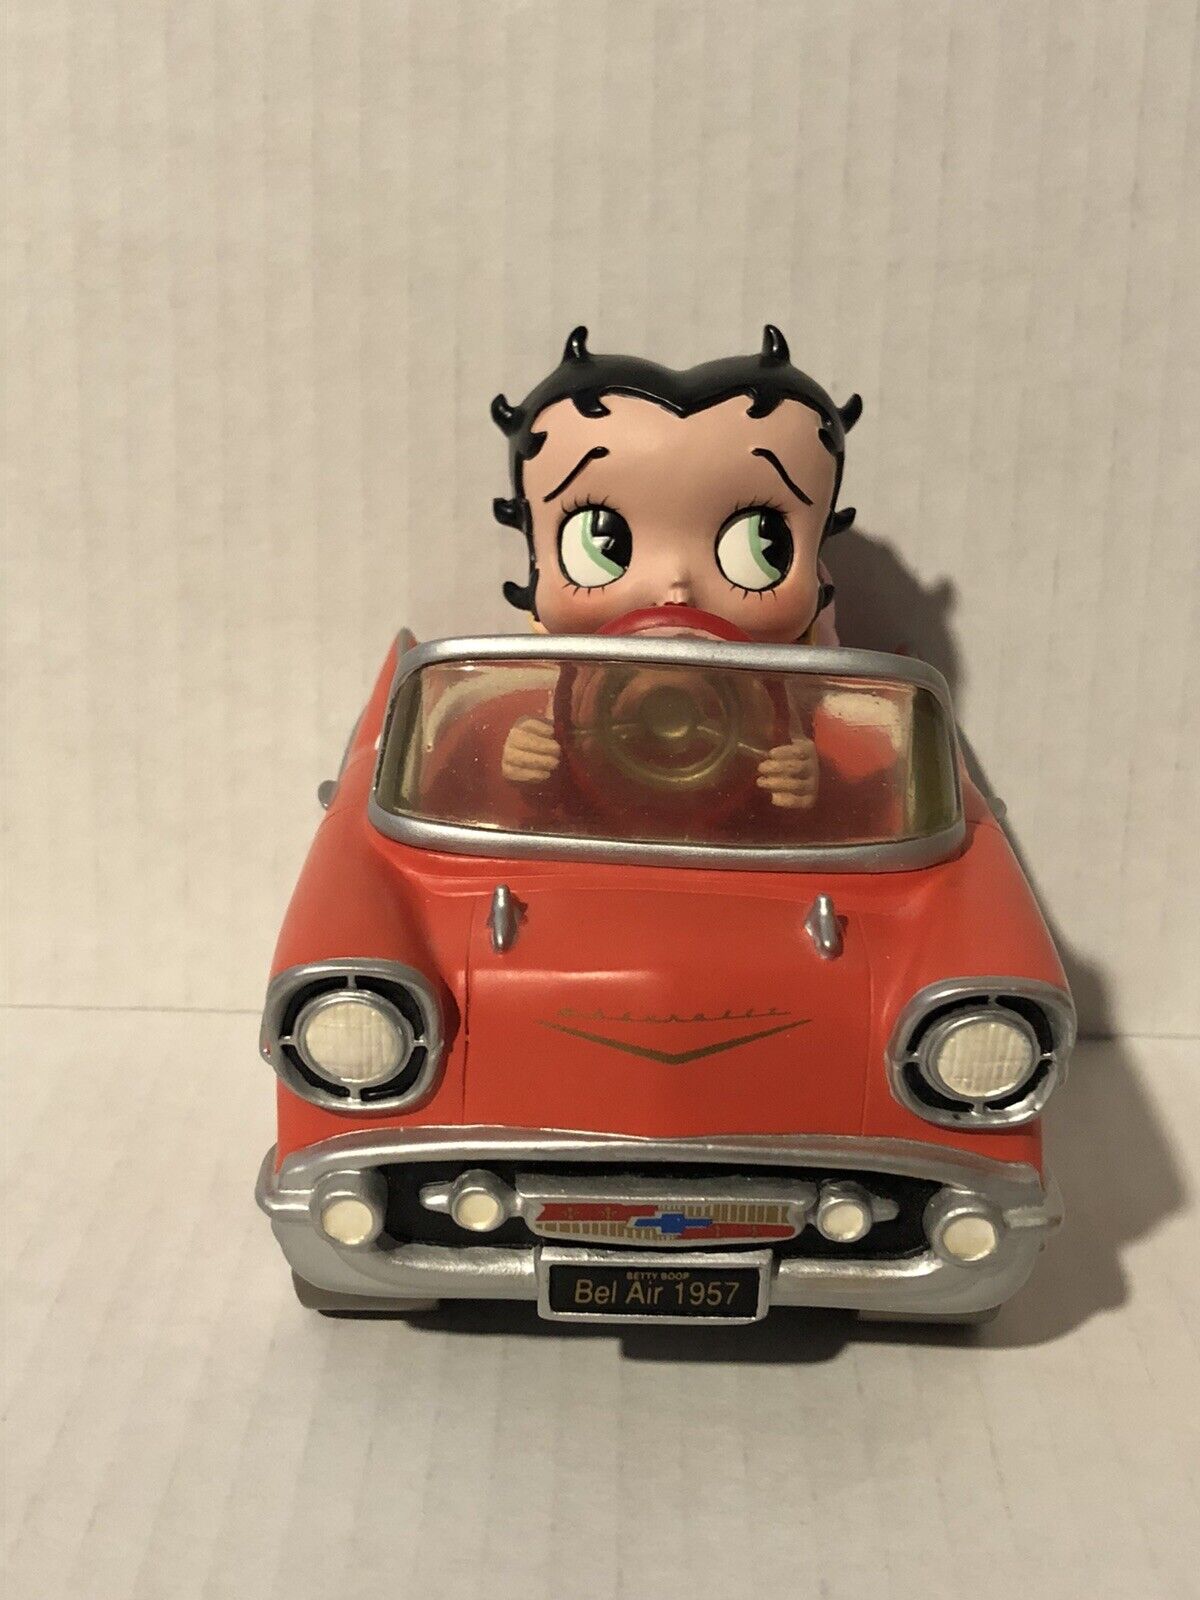 Hot Red Betty Boop 57 Chevy Bel Air 2001 Hearst Holdings - Bobble Head￼ Rare